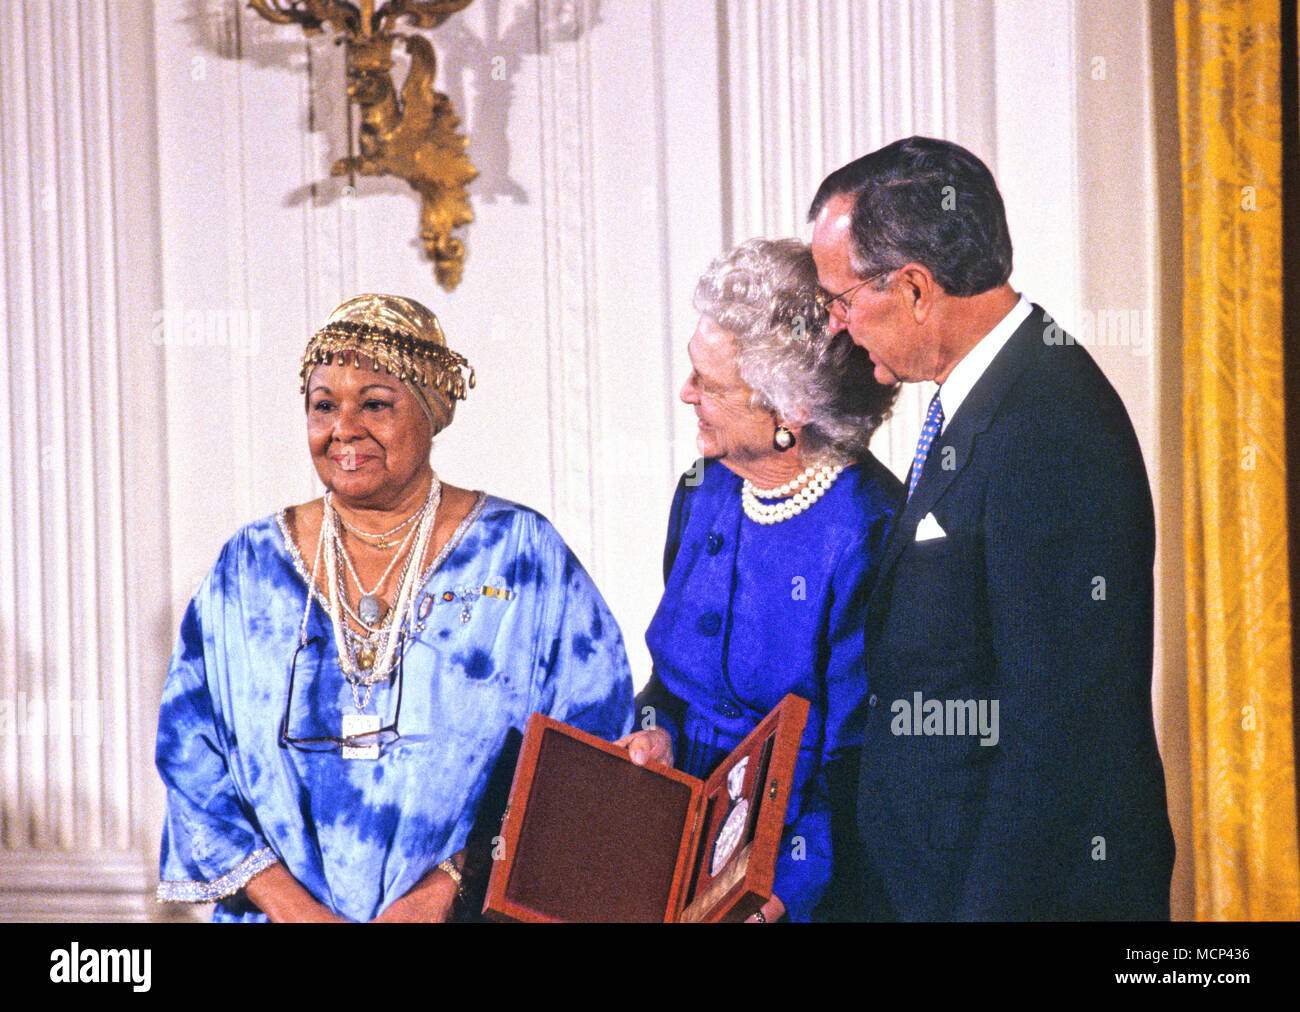 ***FILE PHOO*** BARBARA BUSH HAS PASSED AWAY (1925-2018) United States President George H.W. Bush and first lady Barbara Bush present the National Medal of Arts to American dancer and choreographer Katherine Dunham during a ceremony in the East Room of the White House in Washington, DC on November 19, 1989. Credit: Ron Sachs/CNP /MediaPunch Stock Photo